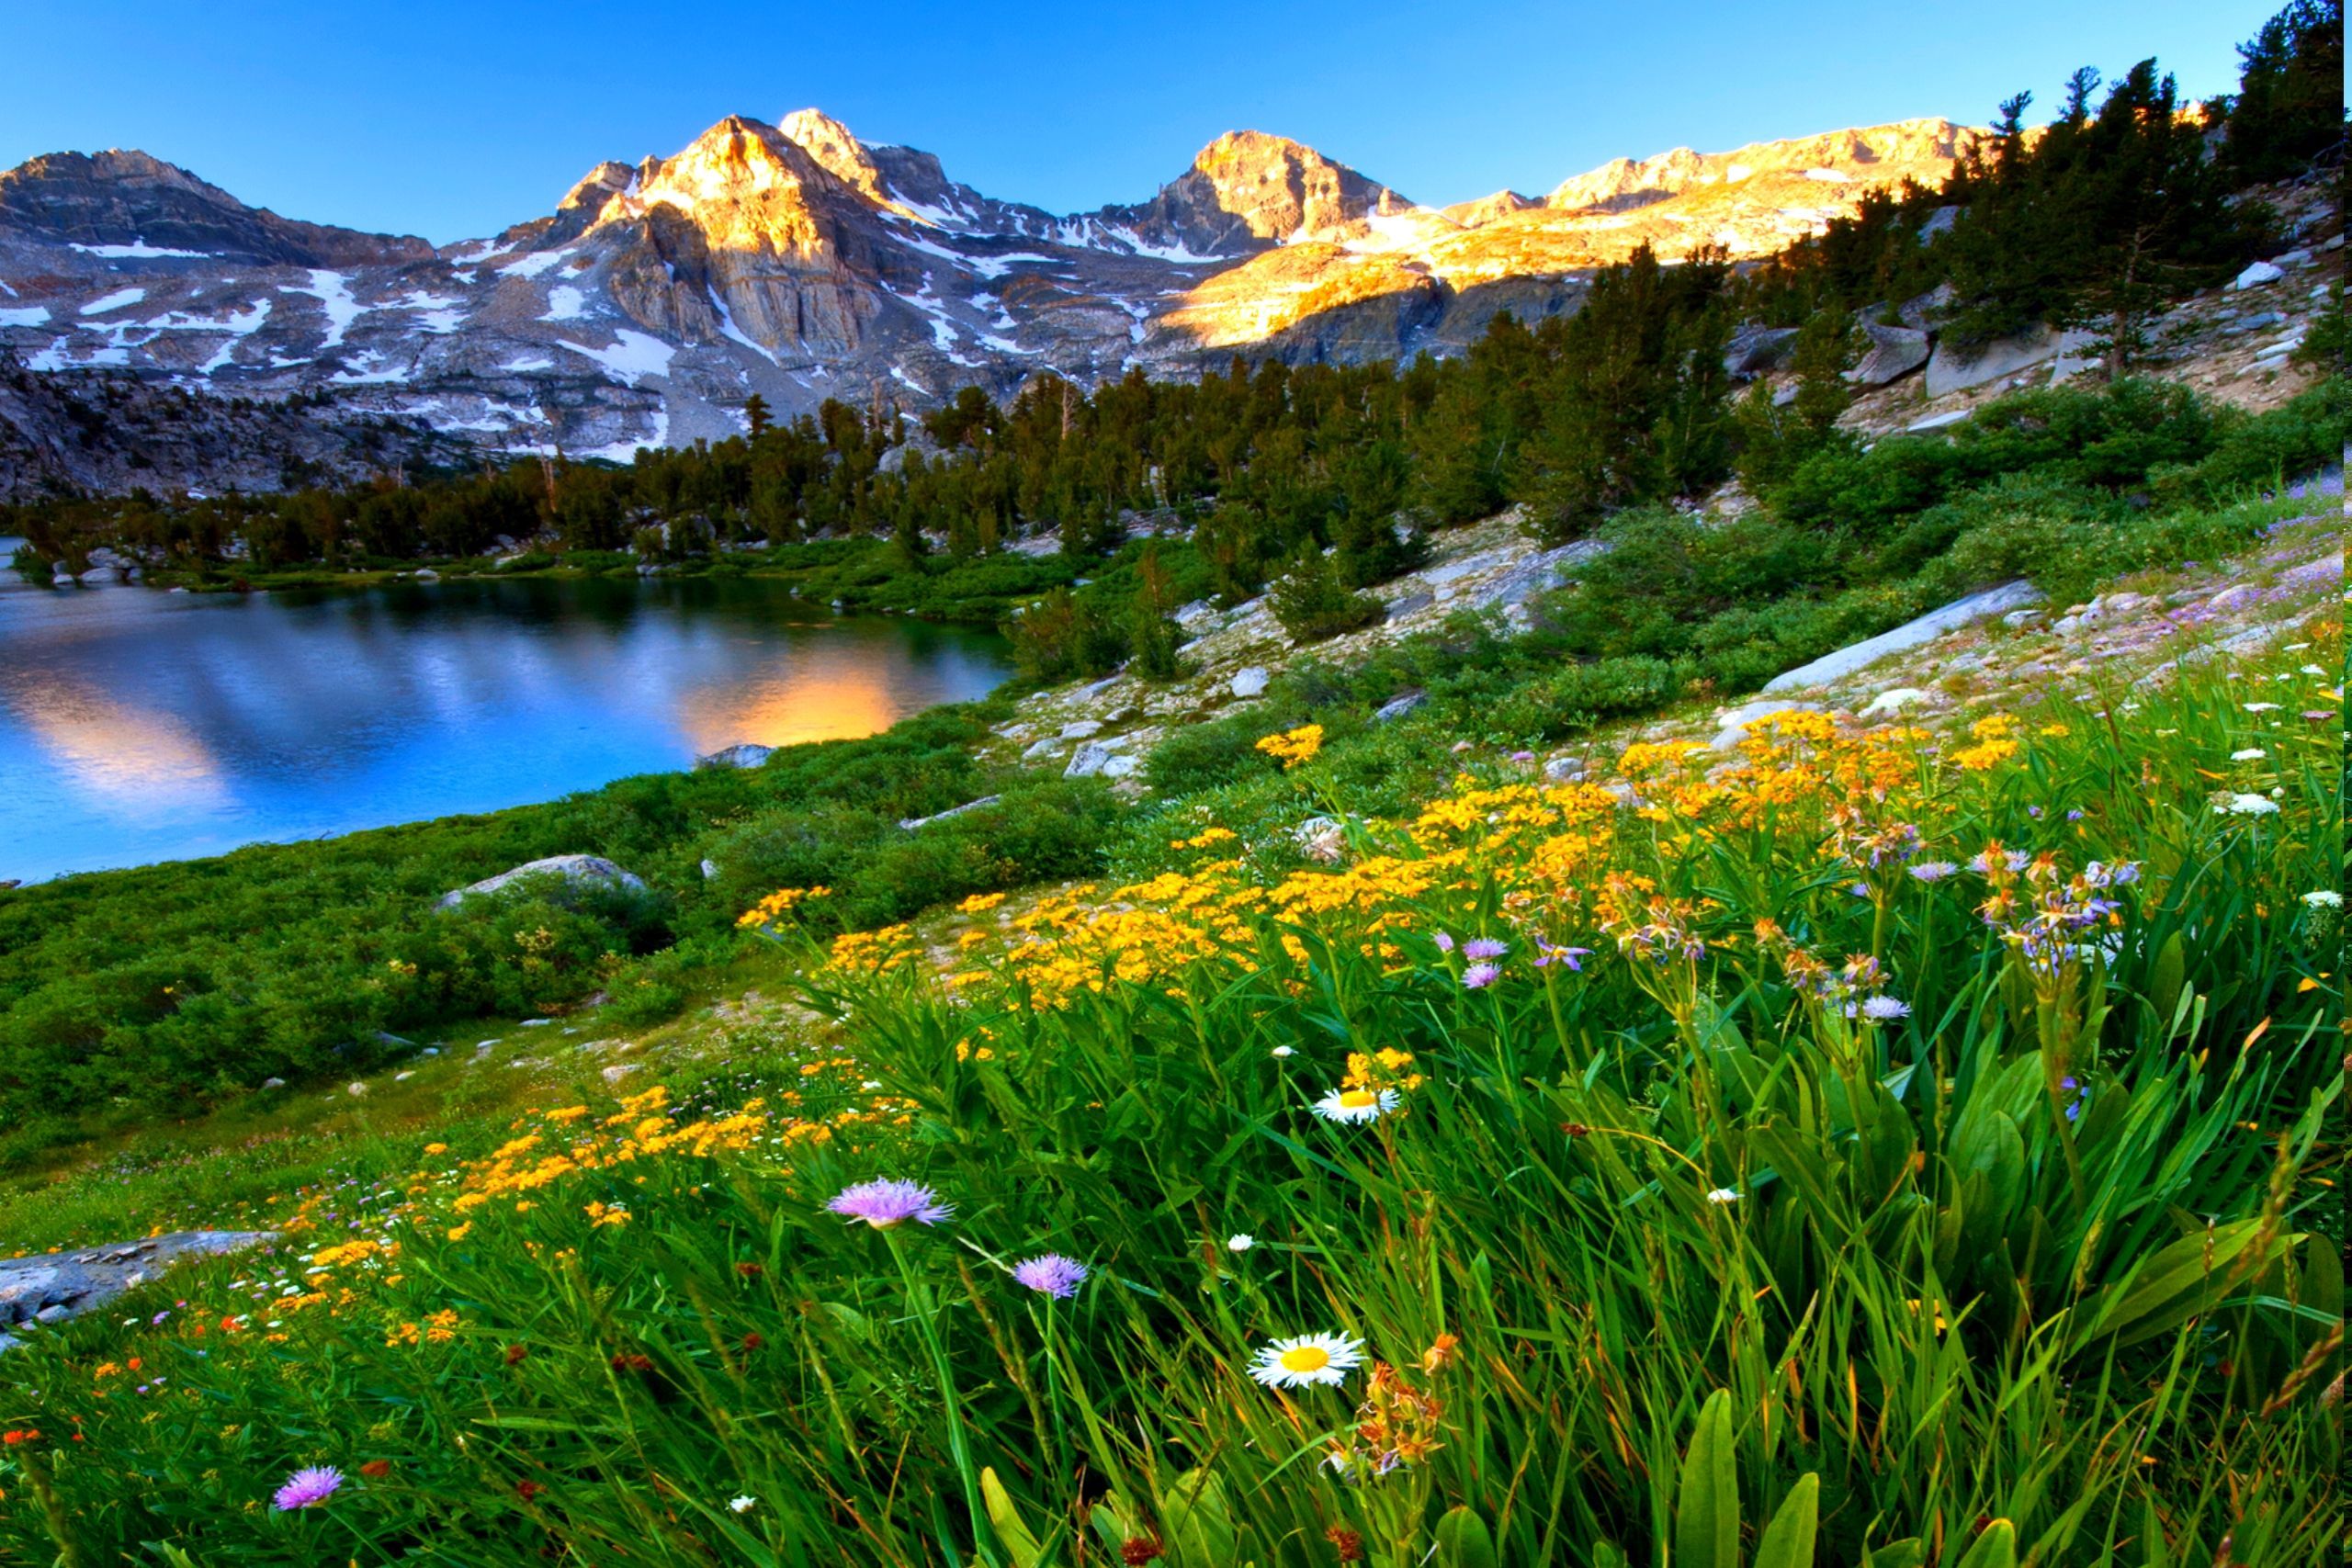 mountain spring meadow. Spring wallpaper, Spring picture, Background image wallpaper